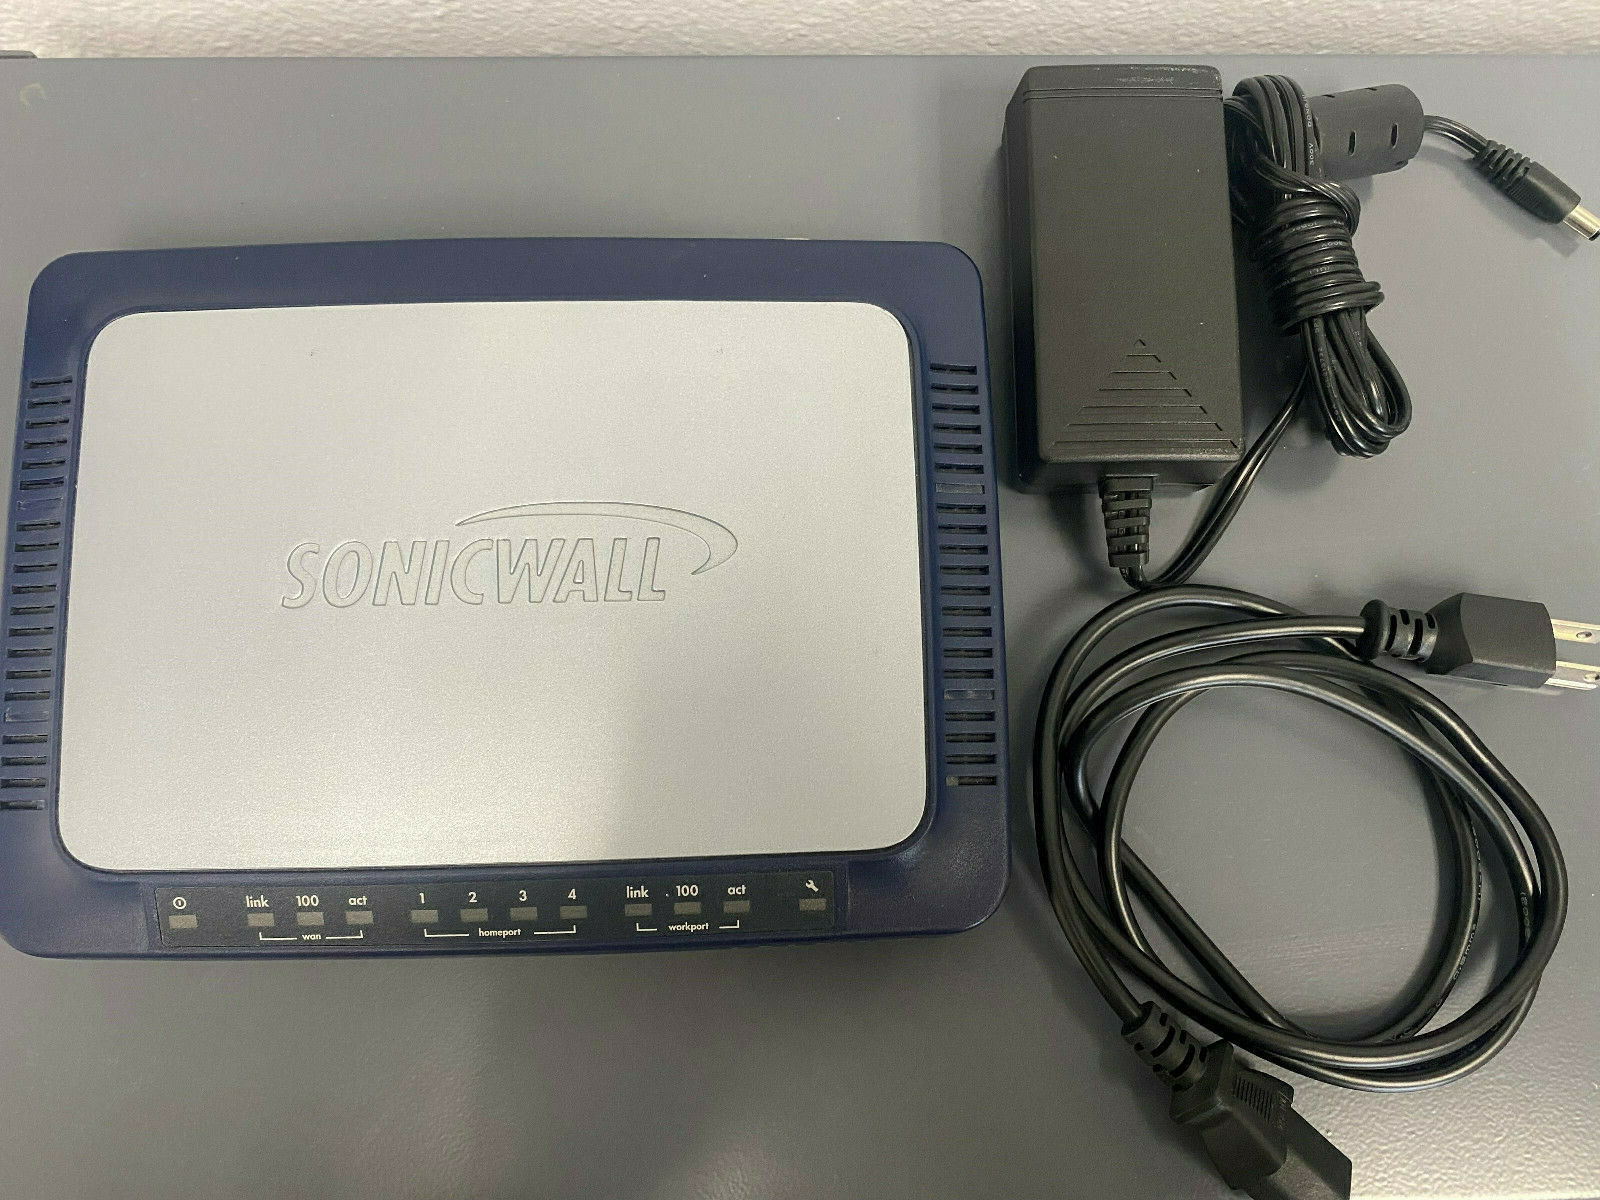 Sonicwall Security Firewall (tele3 Tzx)